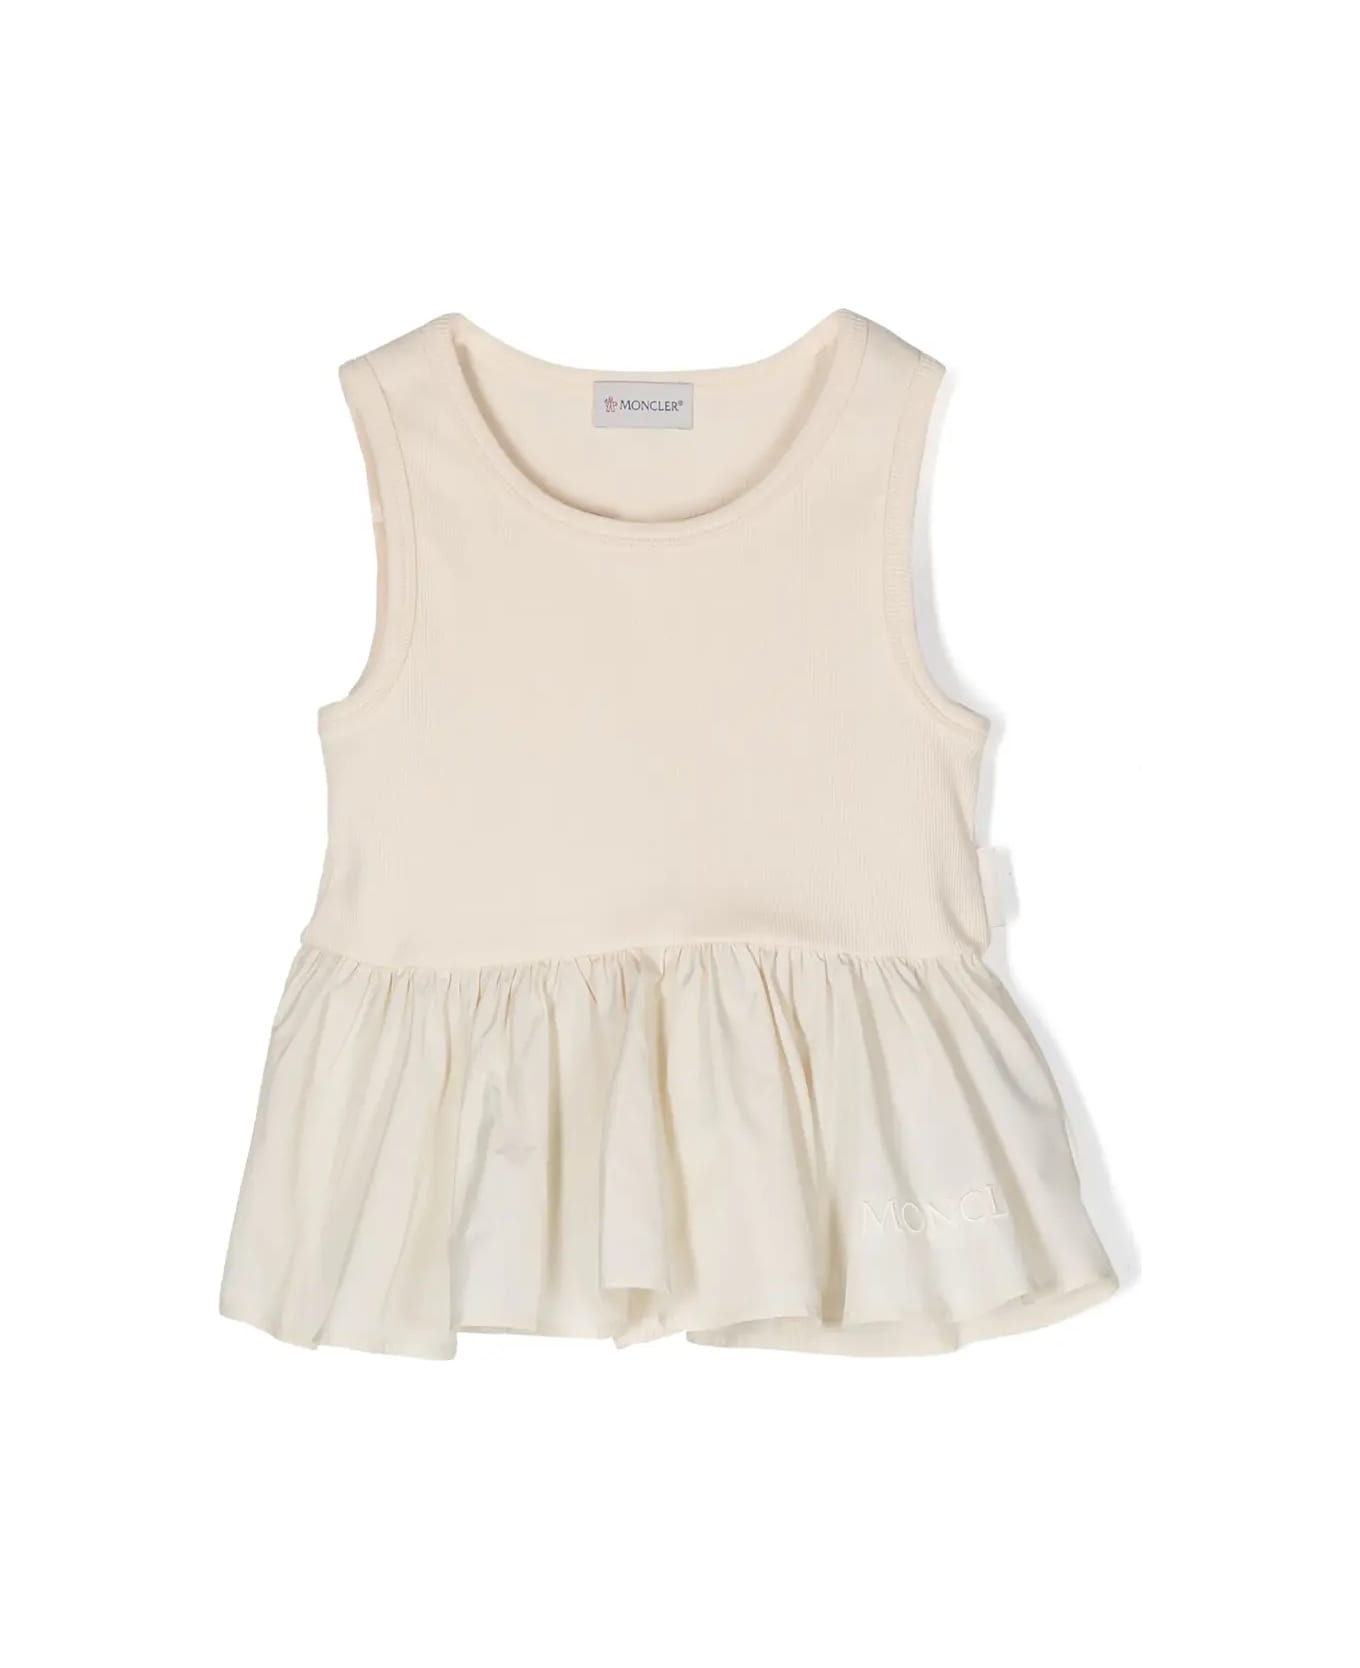 Moncler Ivory Peplum Top With Logo - White